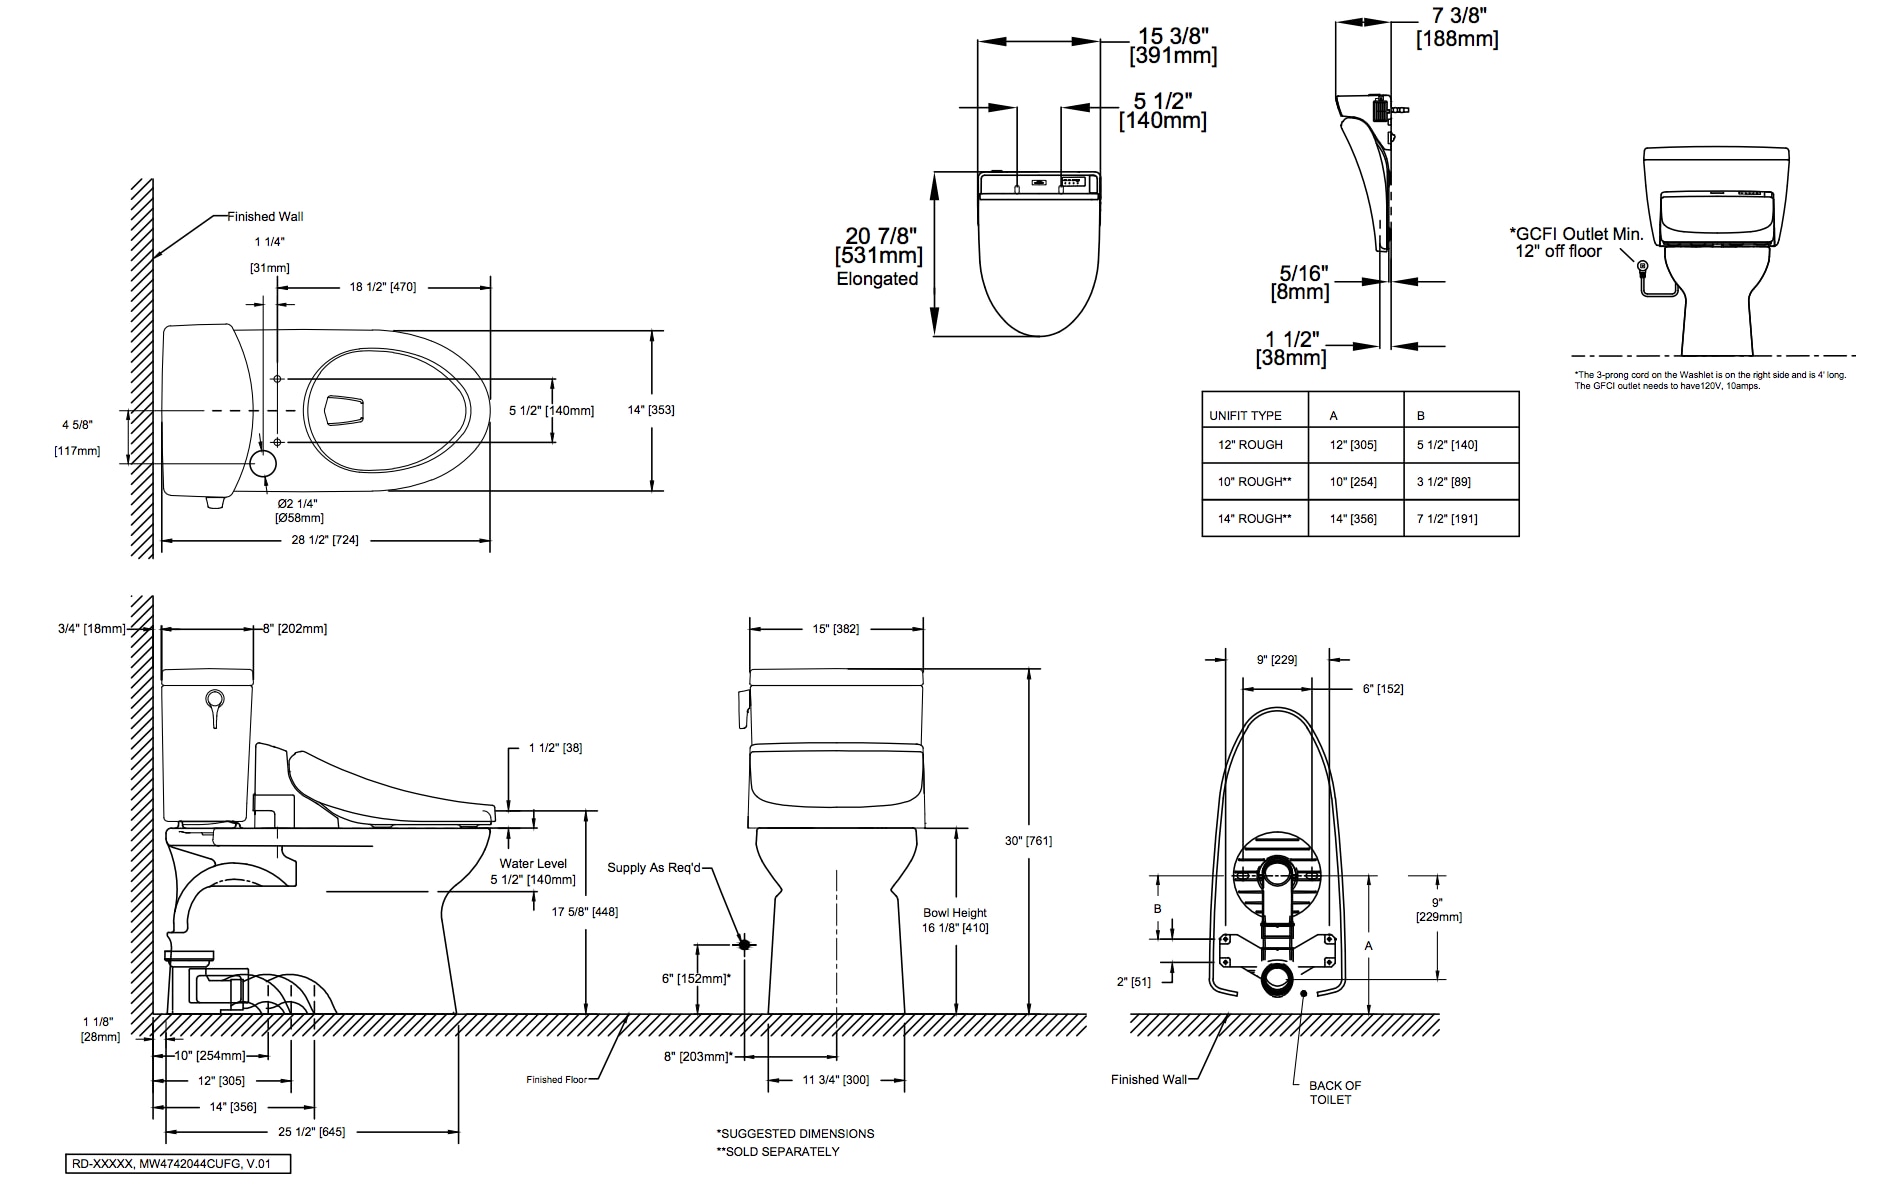 toto-vespin-ii-1g-washlet-c200-two-piece-toilet-and-bidet-system-1.0-gpf-diagram.png